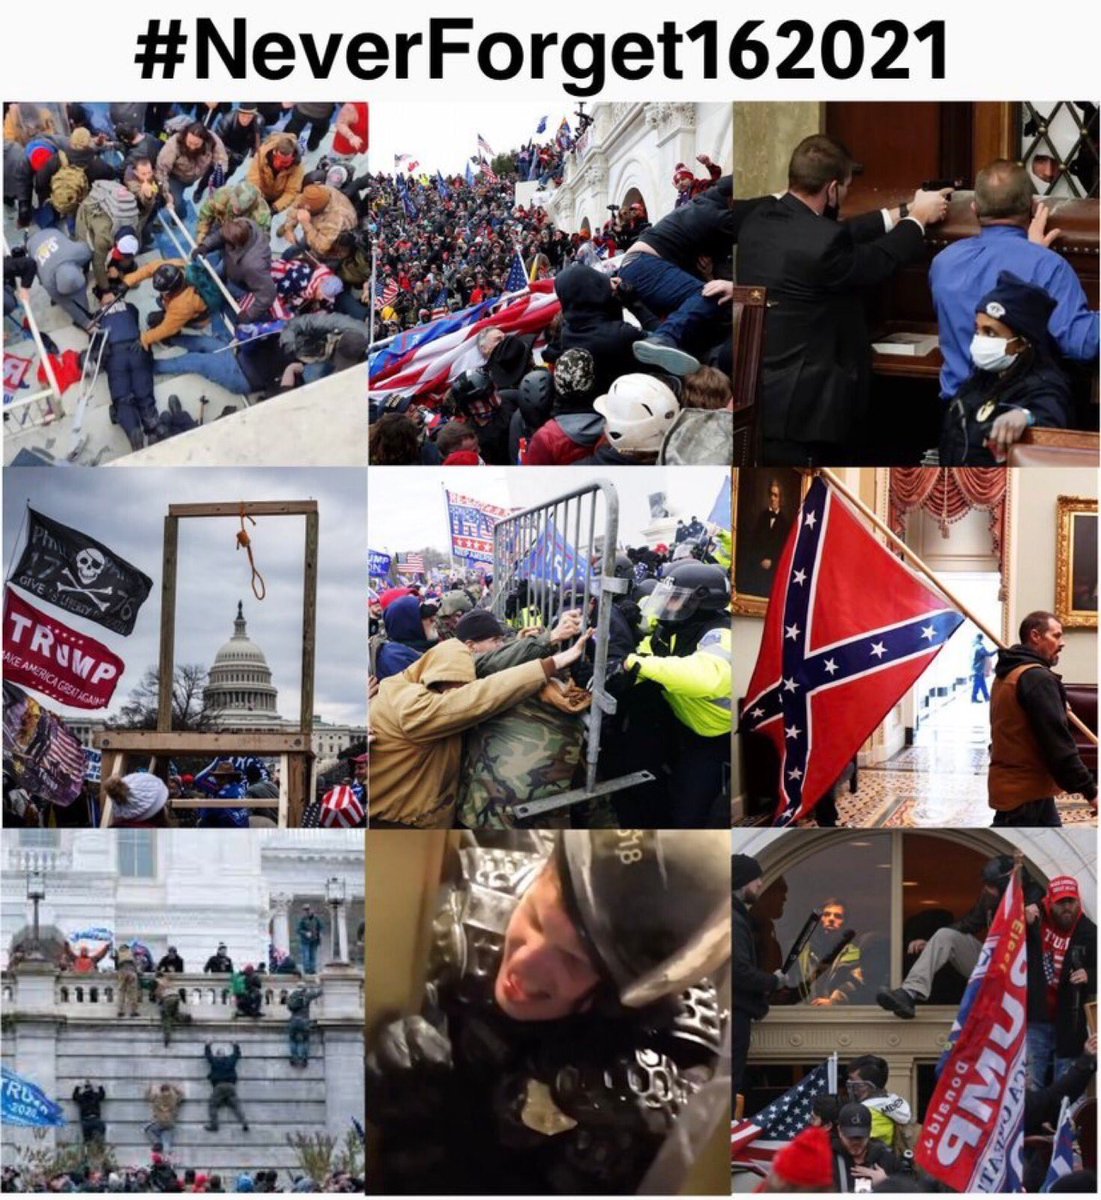 Second anniversary of the day that the republican party lead by Donald J Trump attacked our seat of government. The shit on the floors and spread it on the wall and priceless paintings. We must never forget! #GOPTreason #January6th #GOPDomesticTerrorists #NeverForgetJanuary6th